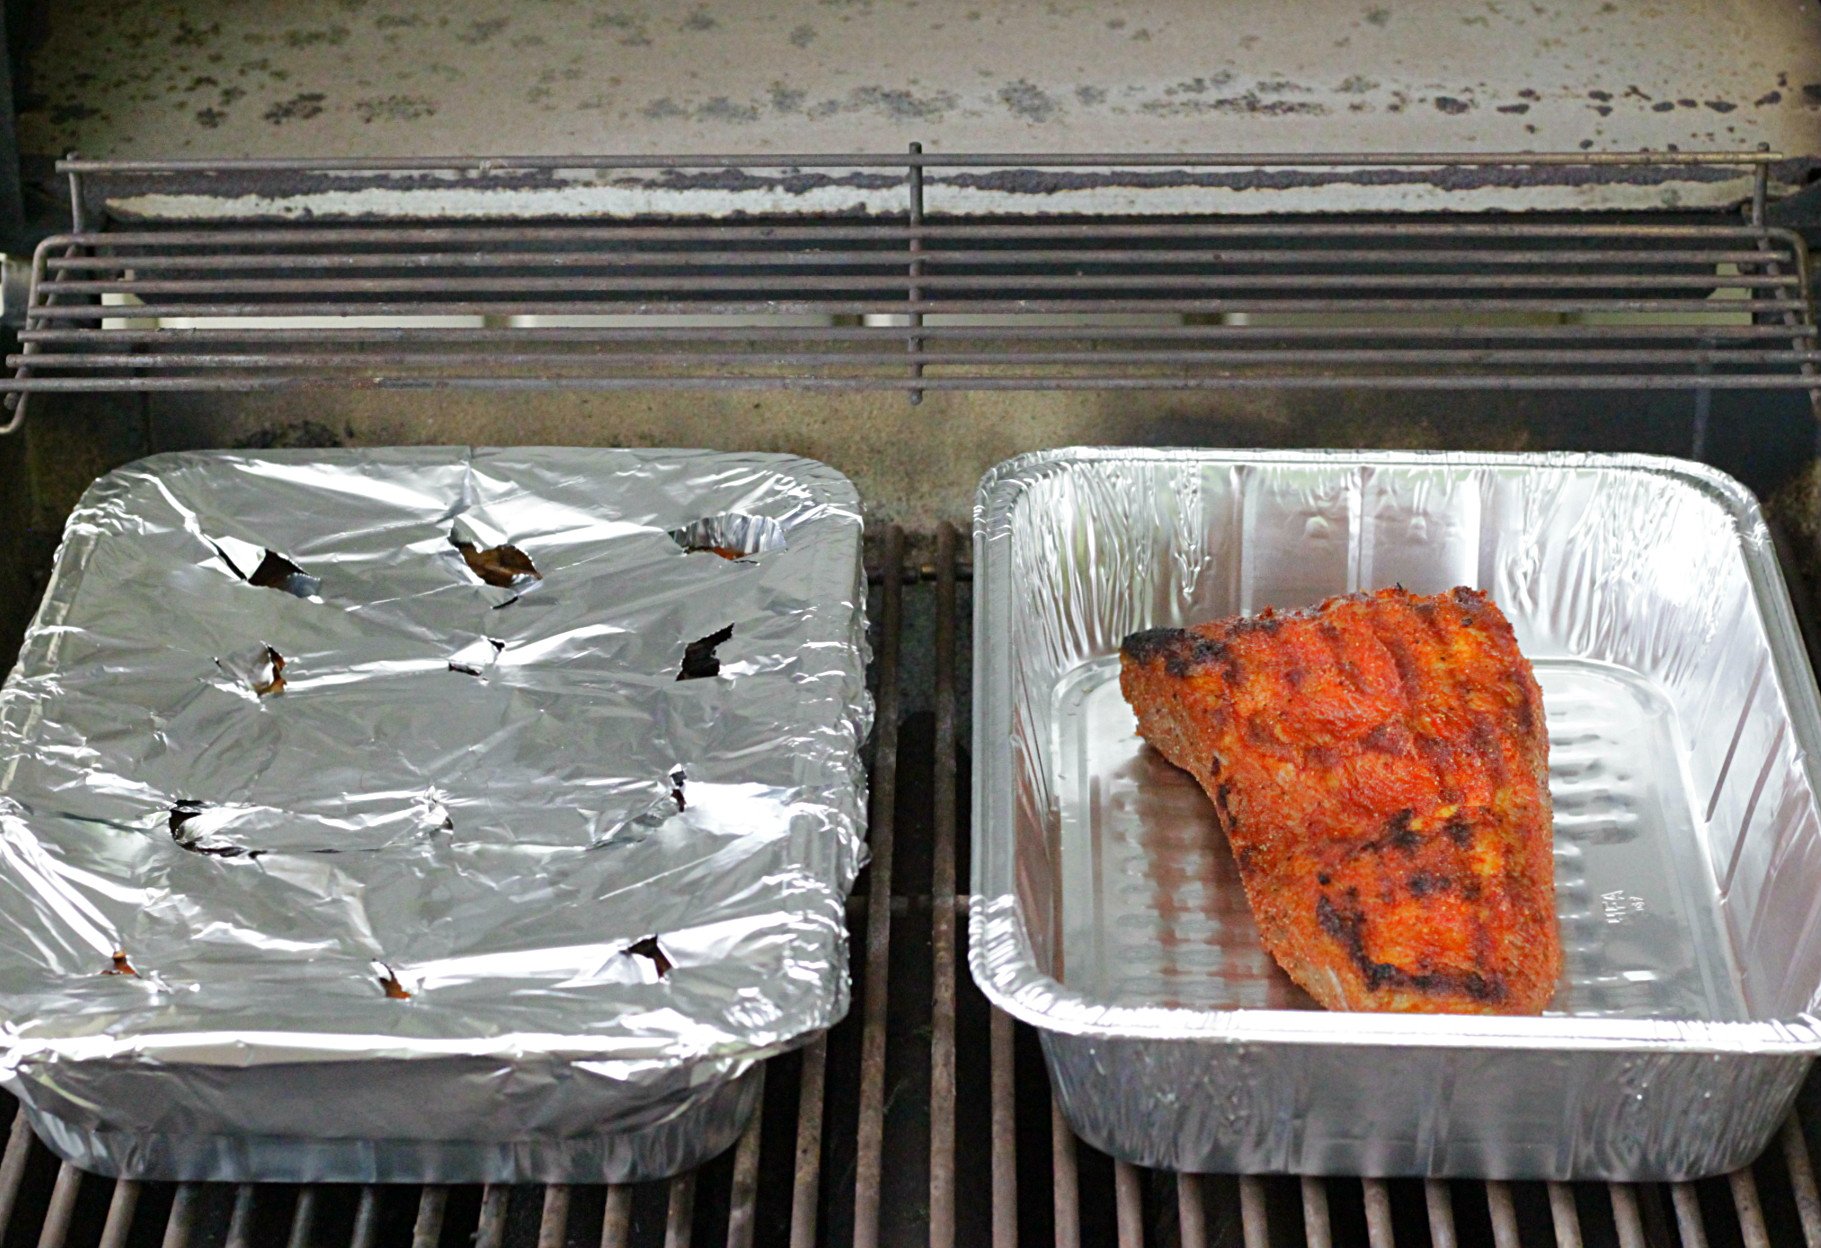 open grill with wood chips foil pan and brisket in process of grilling